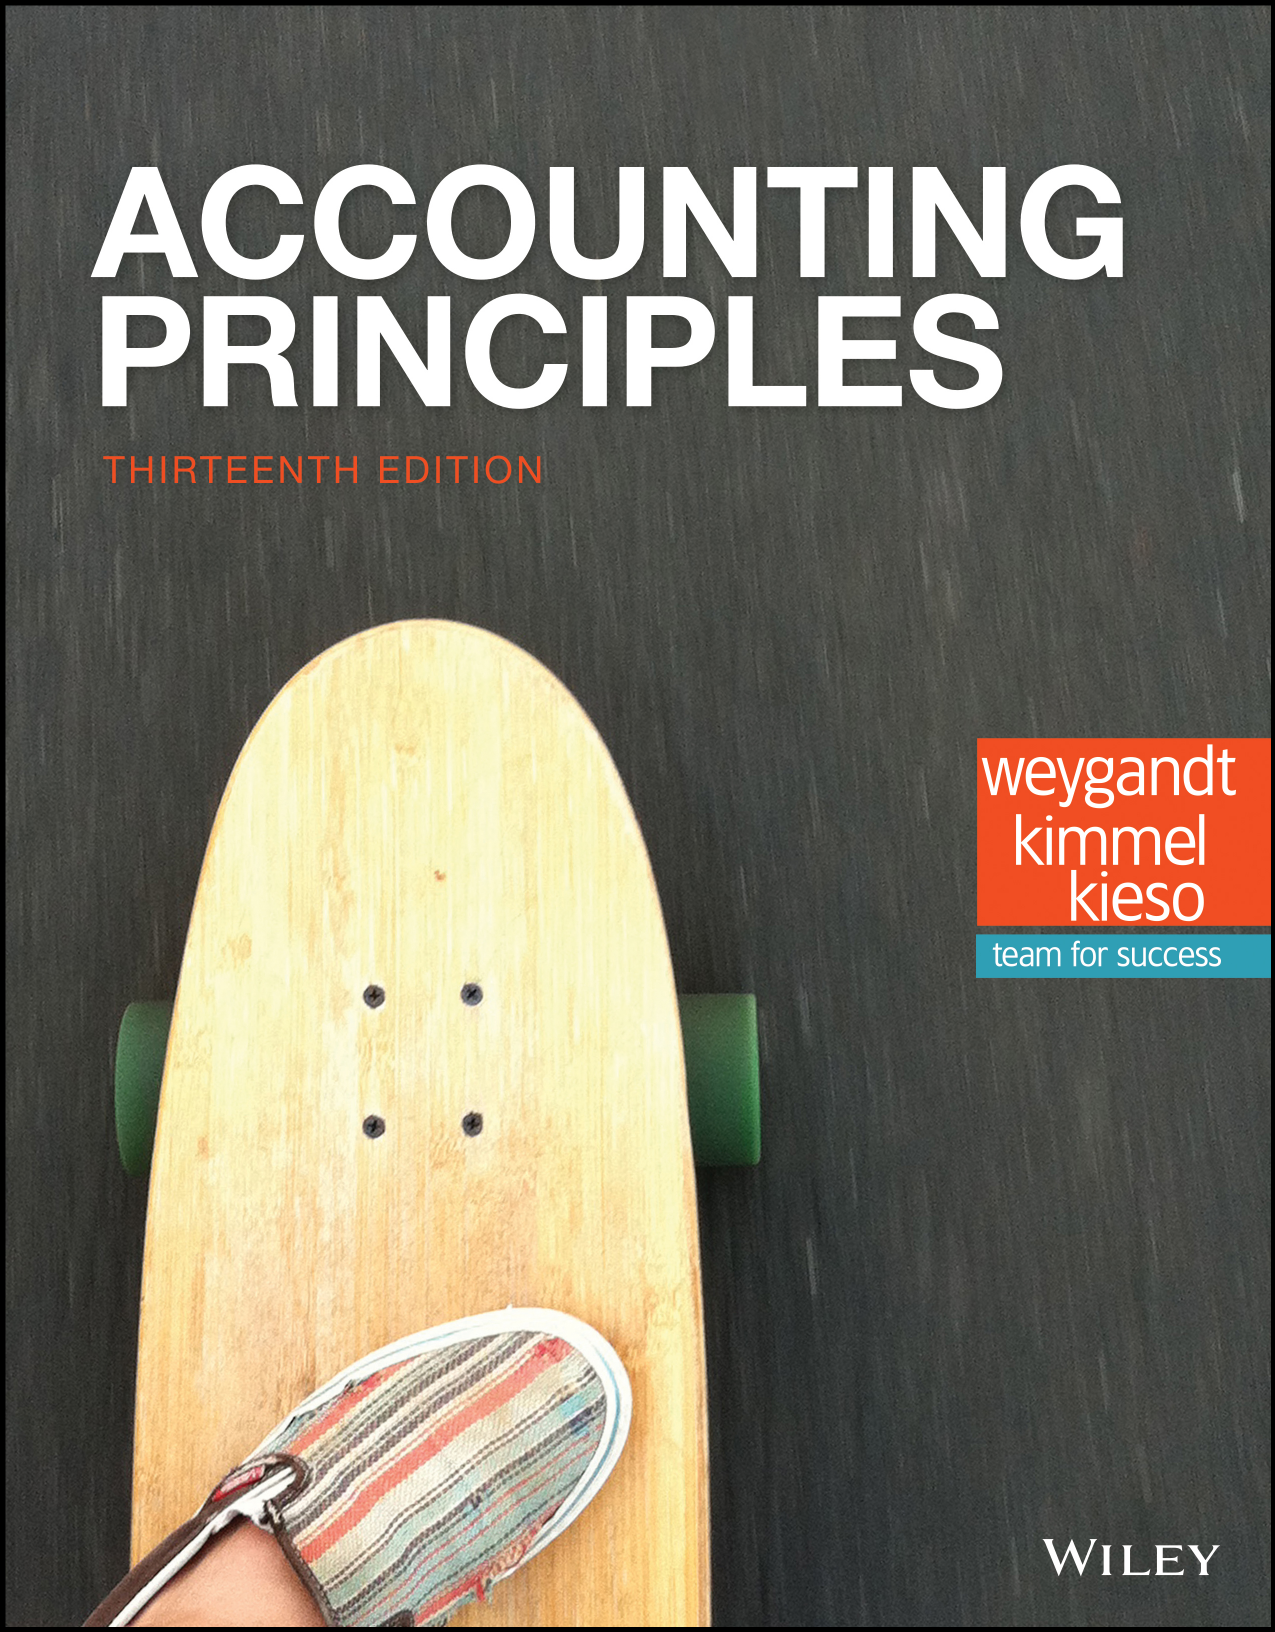 Accounting principles weygandt 10th edition pdf free download chris brown dont judge me download